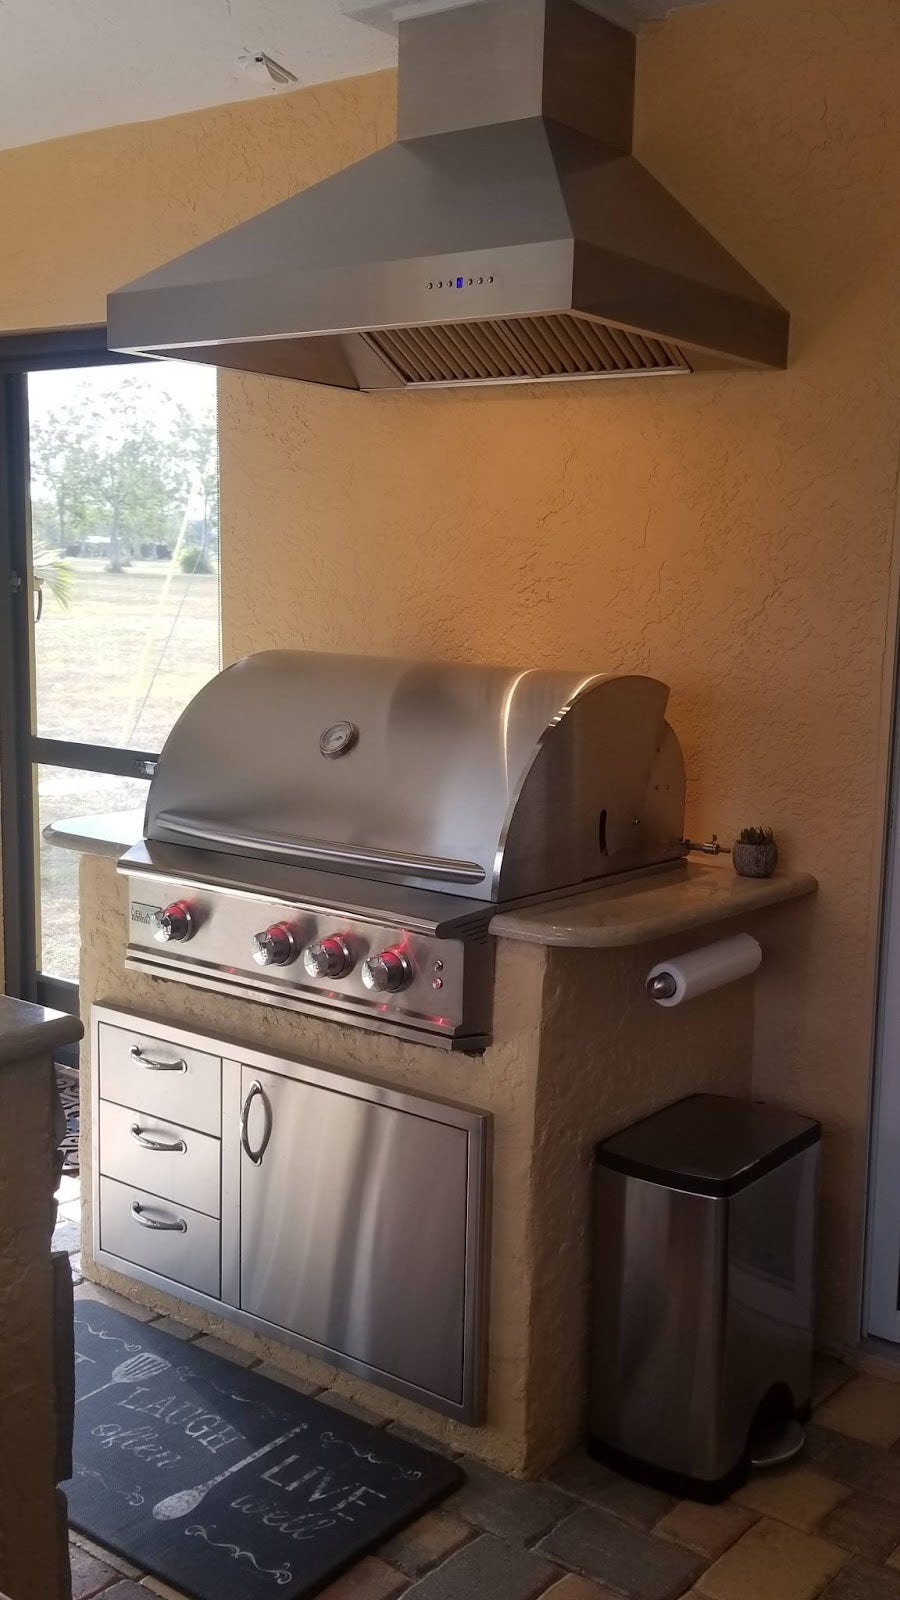 Proline range hood towering over a premium outdoor grill with a stone countertop and ample cabinet storage, creating a perfect backyard cooking spot - prolinerangehoods.com.